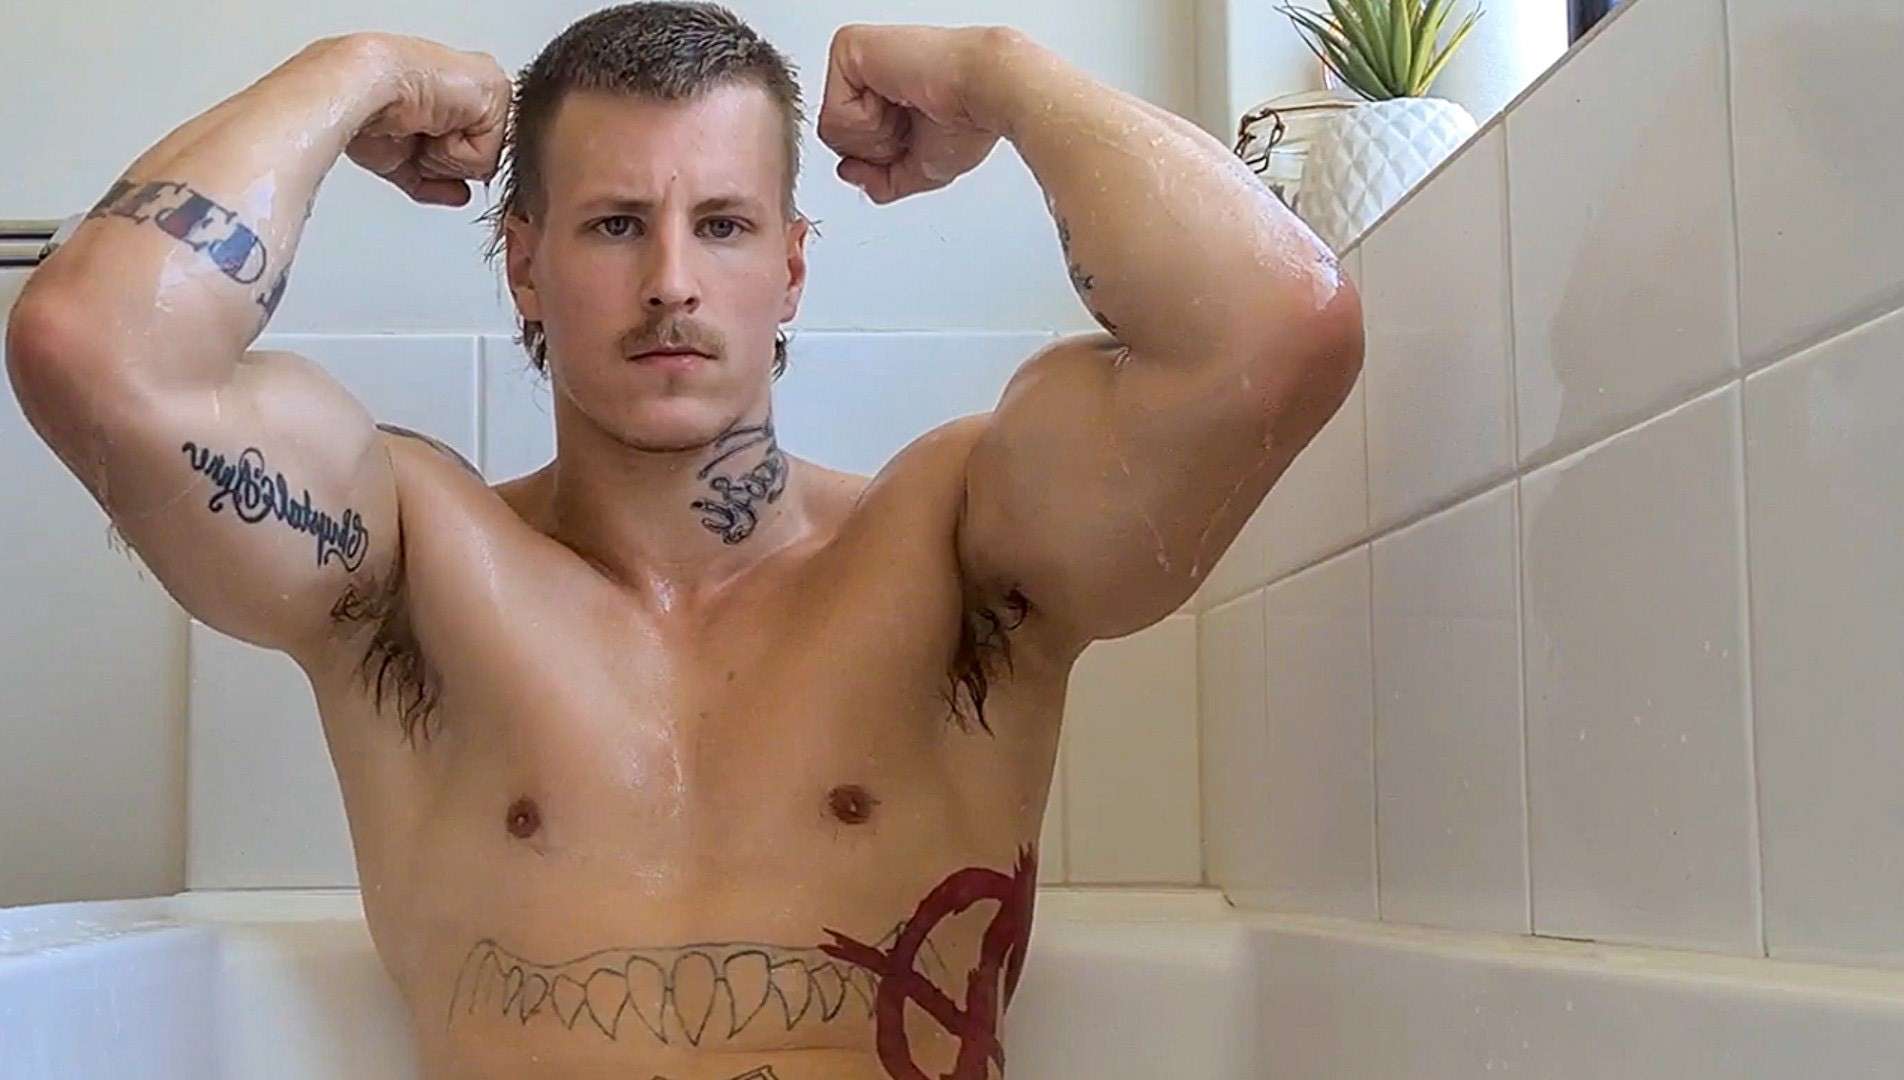 Alec Nysten turned to an OnlyFans explicit porn account to provide a family income, but image theft now threatens to ruin it